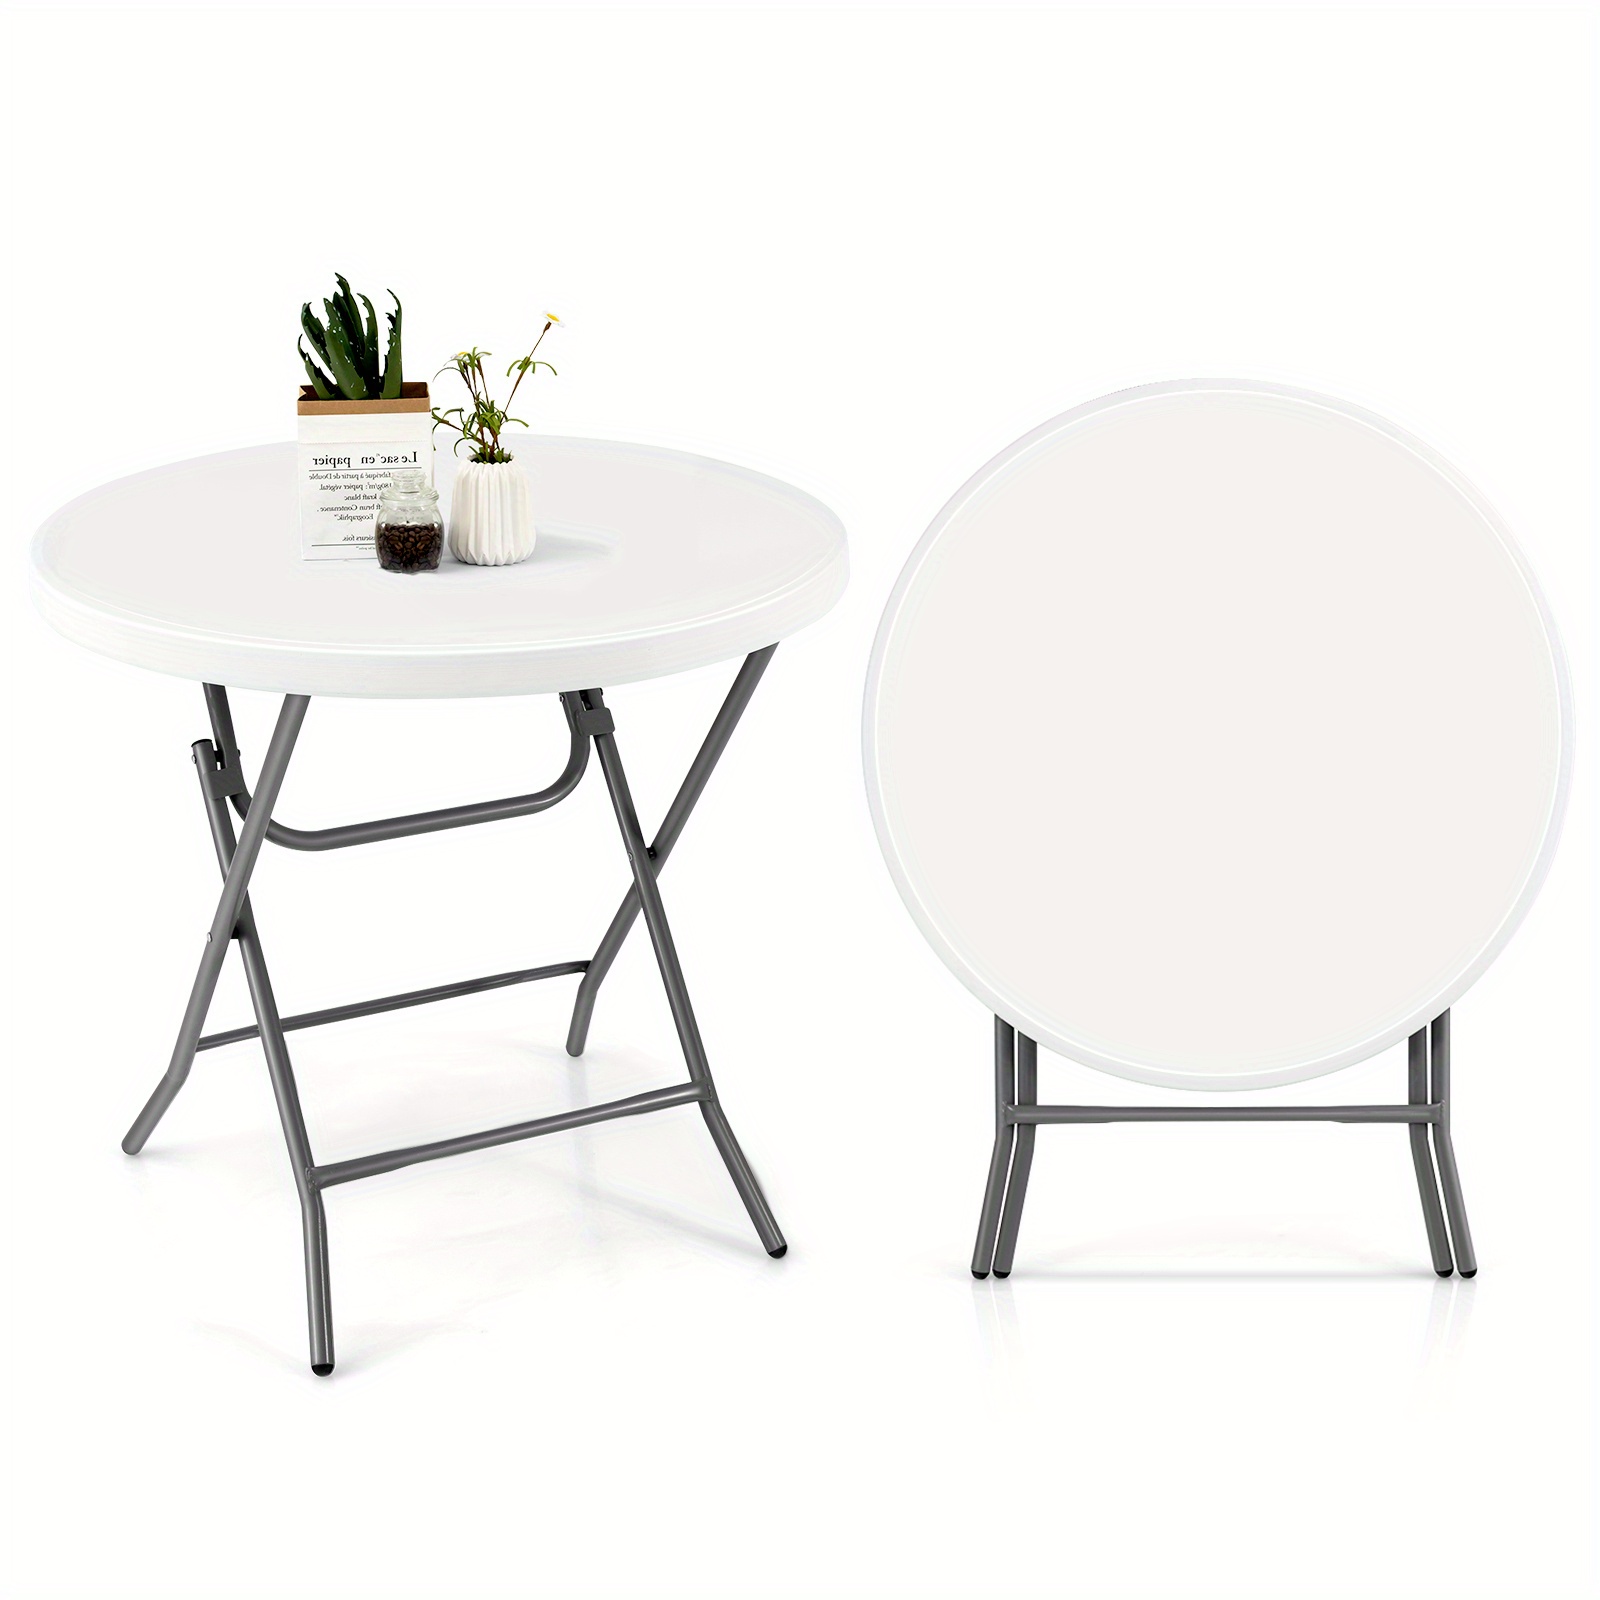 

Giantex 32" Round Folding Table Portable & Lightweight Table For Indoor & Outdoor Use White